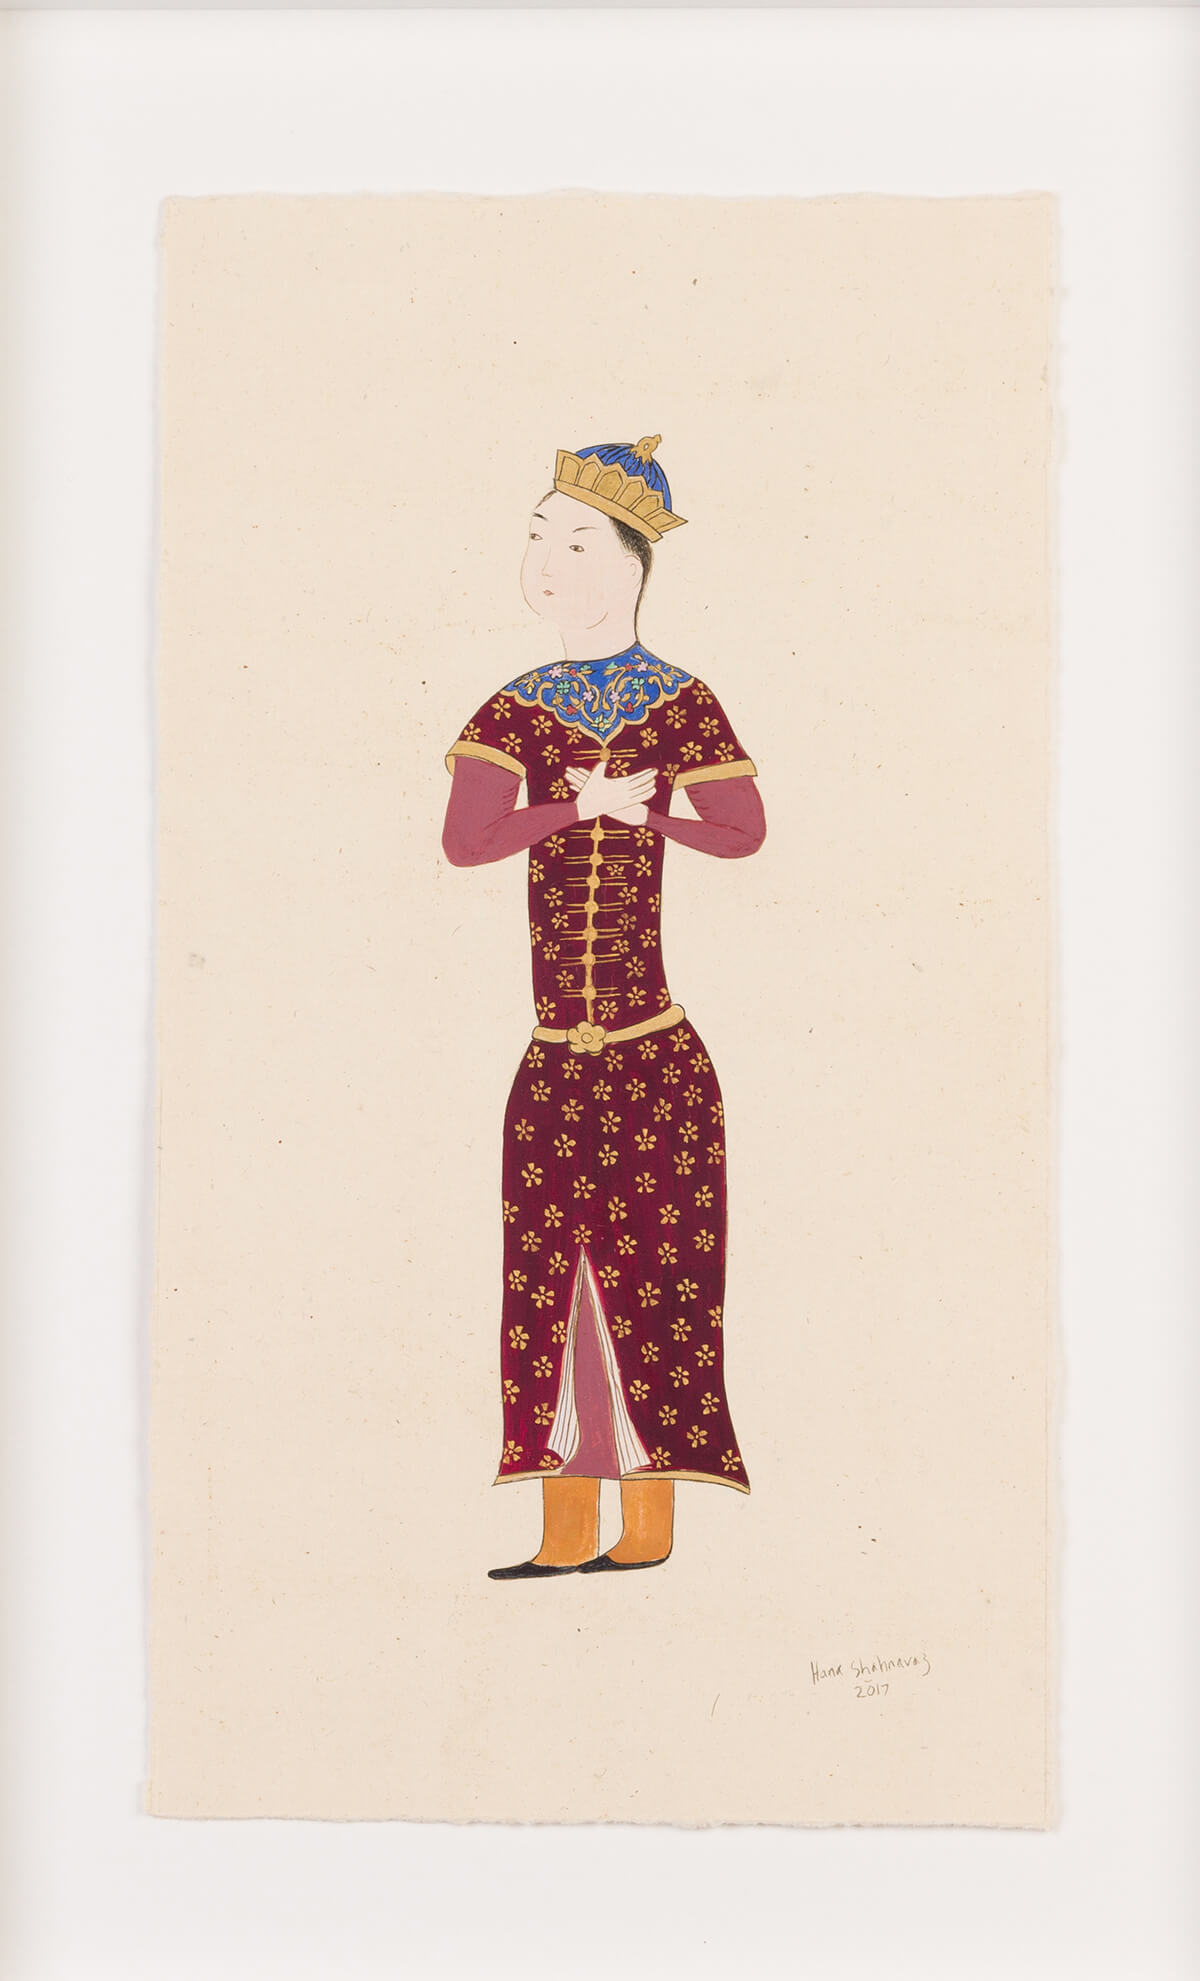 Painting of a man in traditional oriental style dress